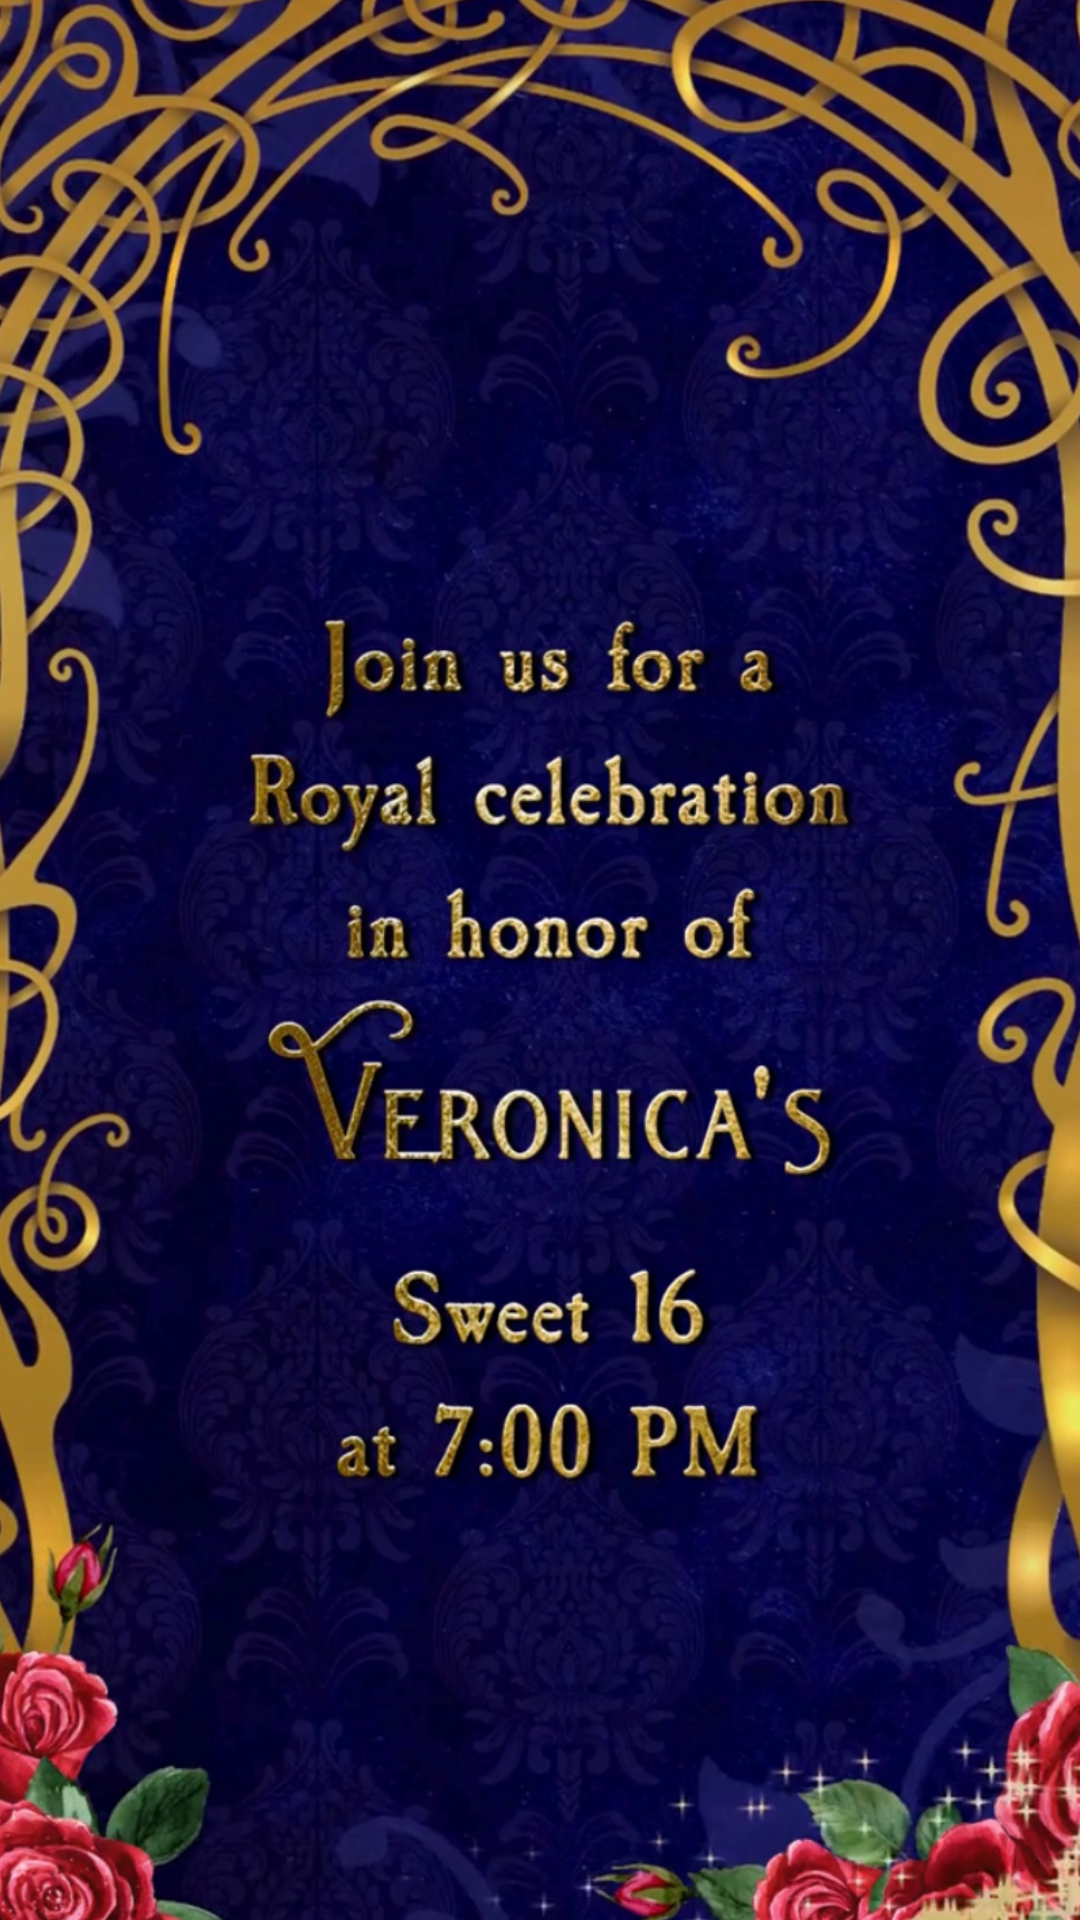 Beauty and Beast Yellow Sweet 16 Video Invite - Beauty and The Beast Yellow Dress Theme Digital Invite